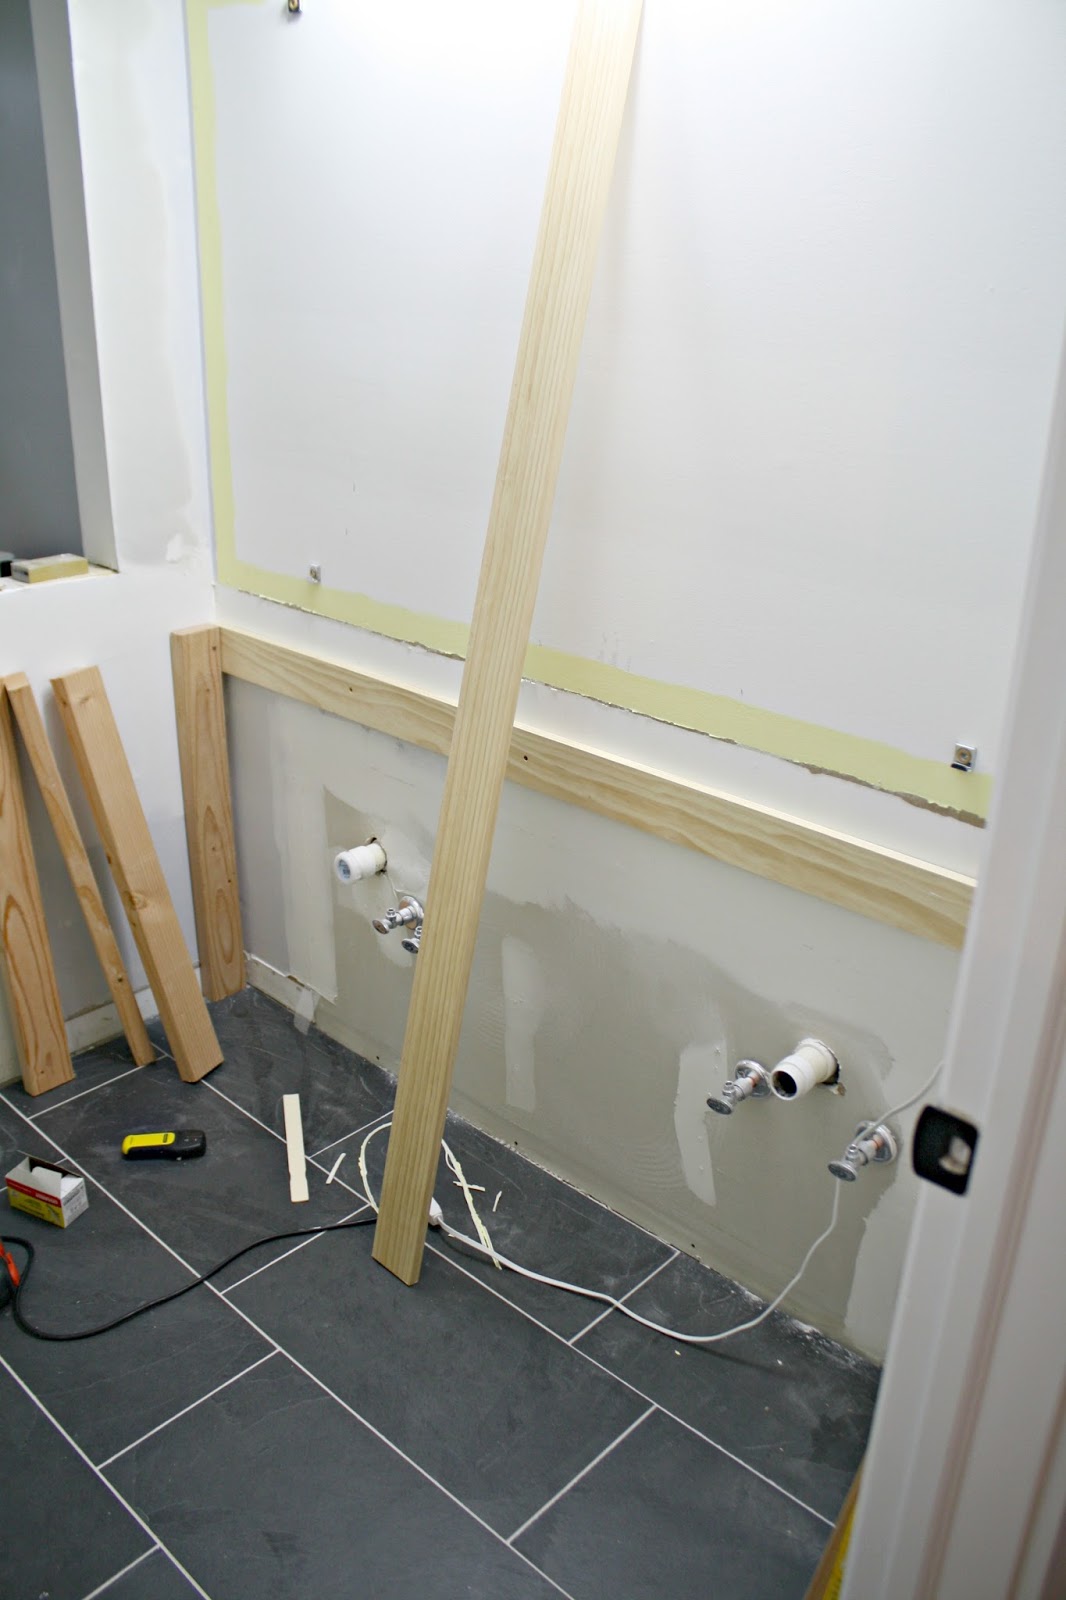 How to Build a Built-in Bath Cabinet (DIY)